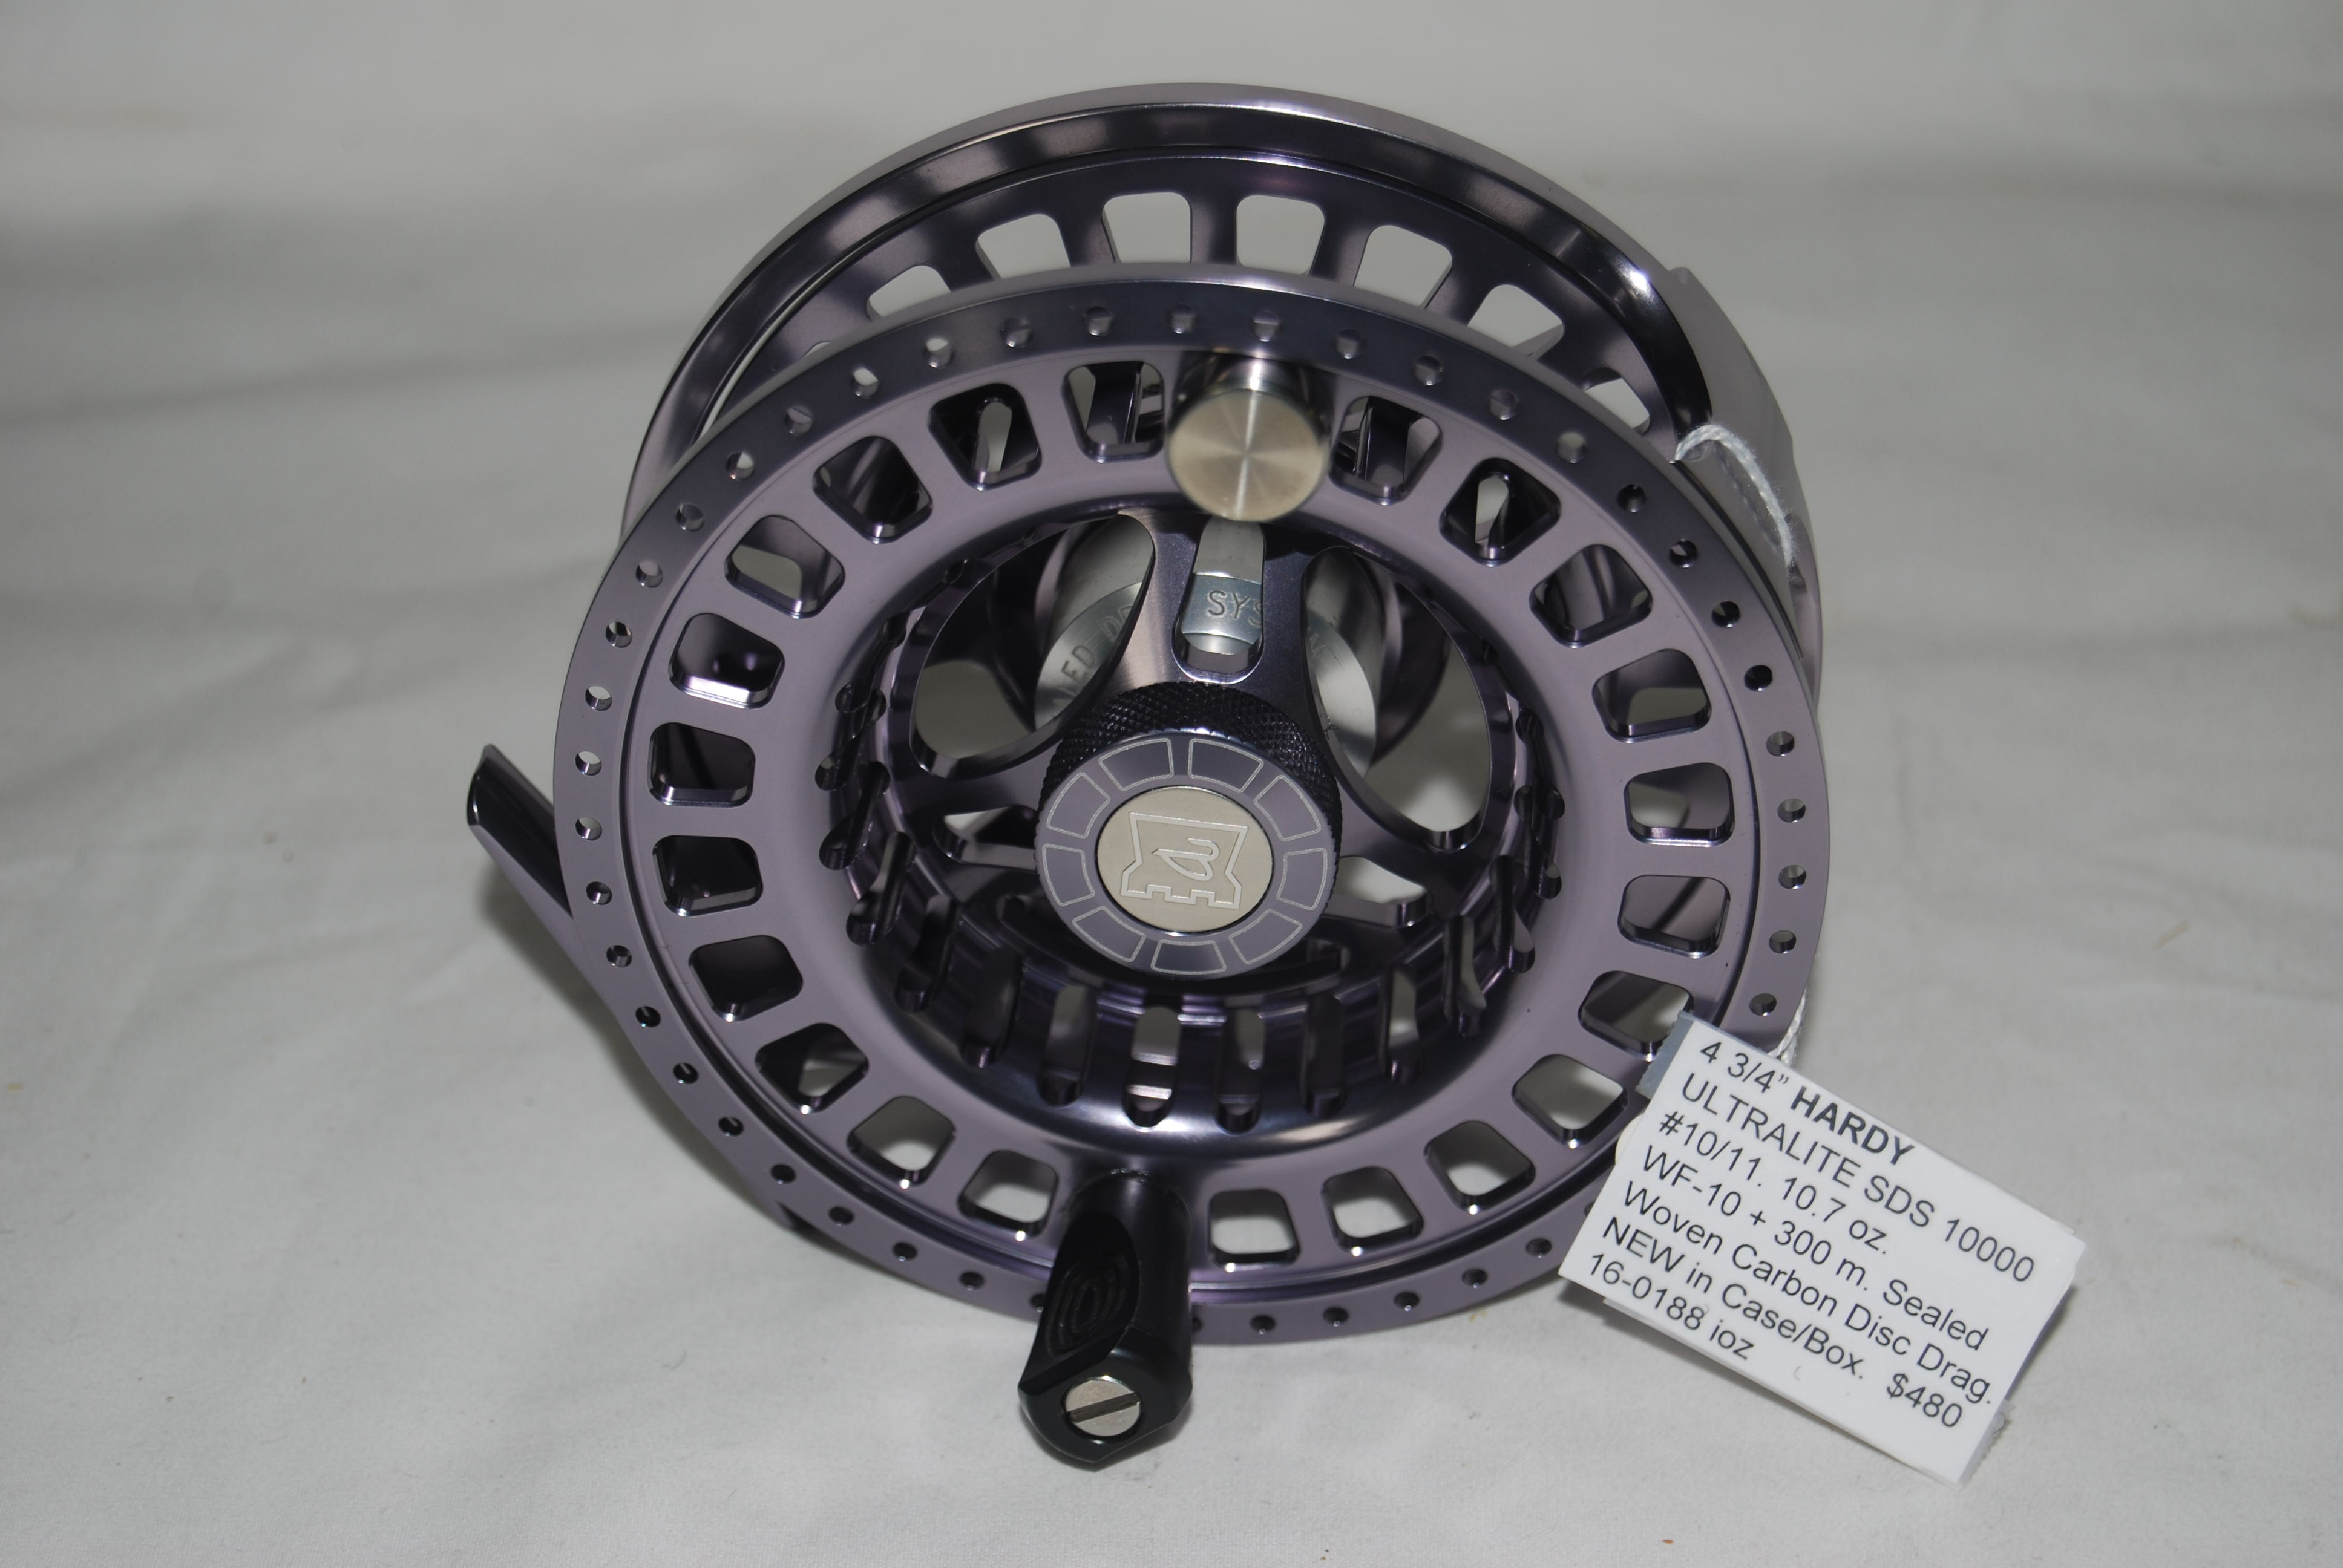 4 3/4” HARDY ULTRALITE SDS 10000 #10/11. LHW/RHW. Ultra- Large Arbor;  Sealed Woven Carbon Disc Drag; 10.73 oz. Cap. WF-10, + 300 m. 30#;